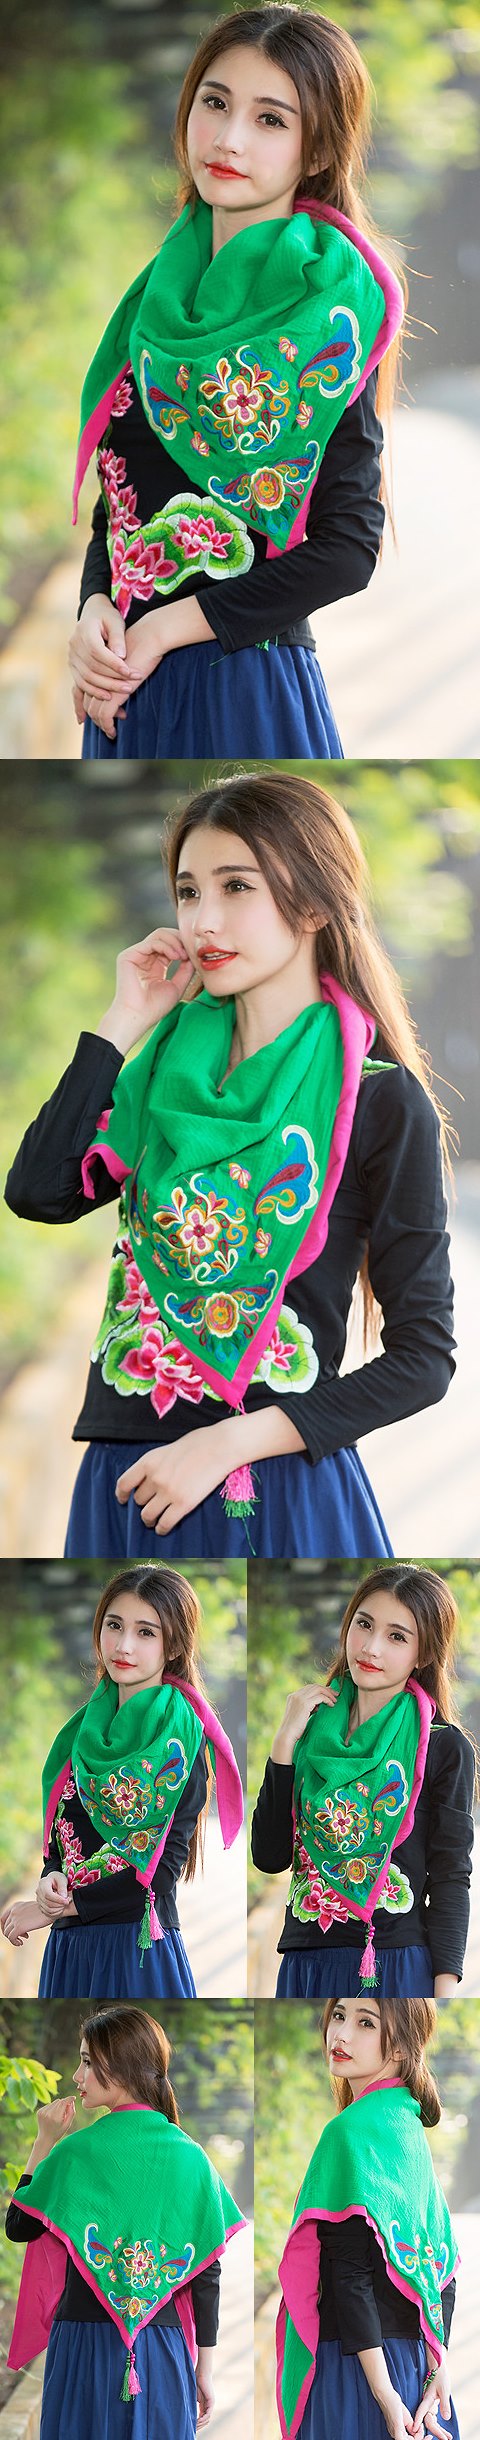 Versatile Ethnic Embroidery Cotton Linen Shawl - Green/Red